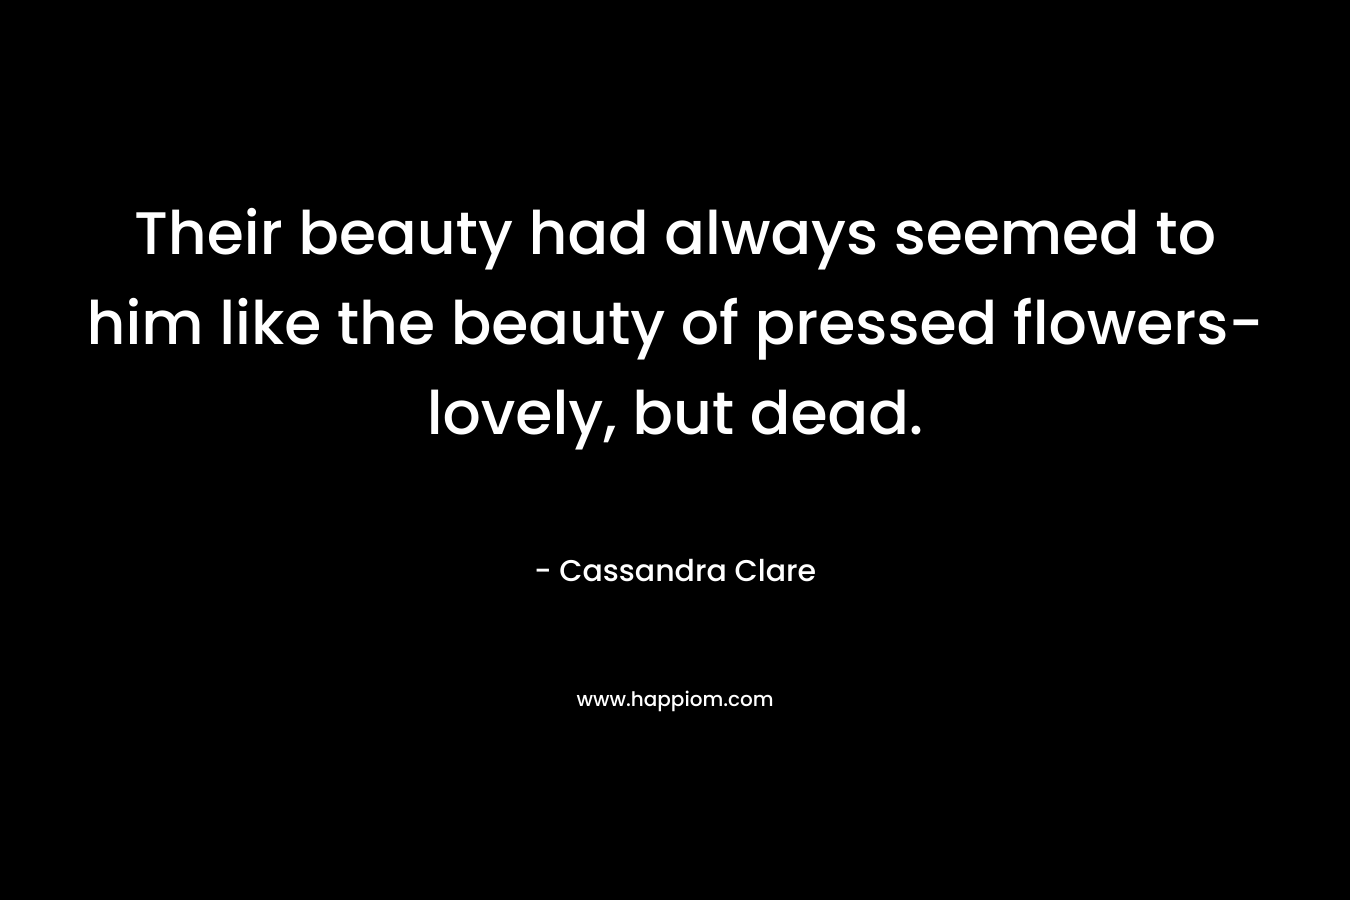 Their beauty had always seemed to him like the beauty of pressed flowers-lovely, but dead. – Cassandra Clare